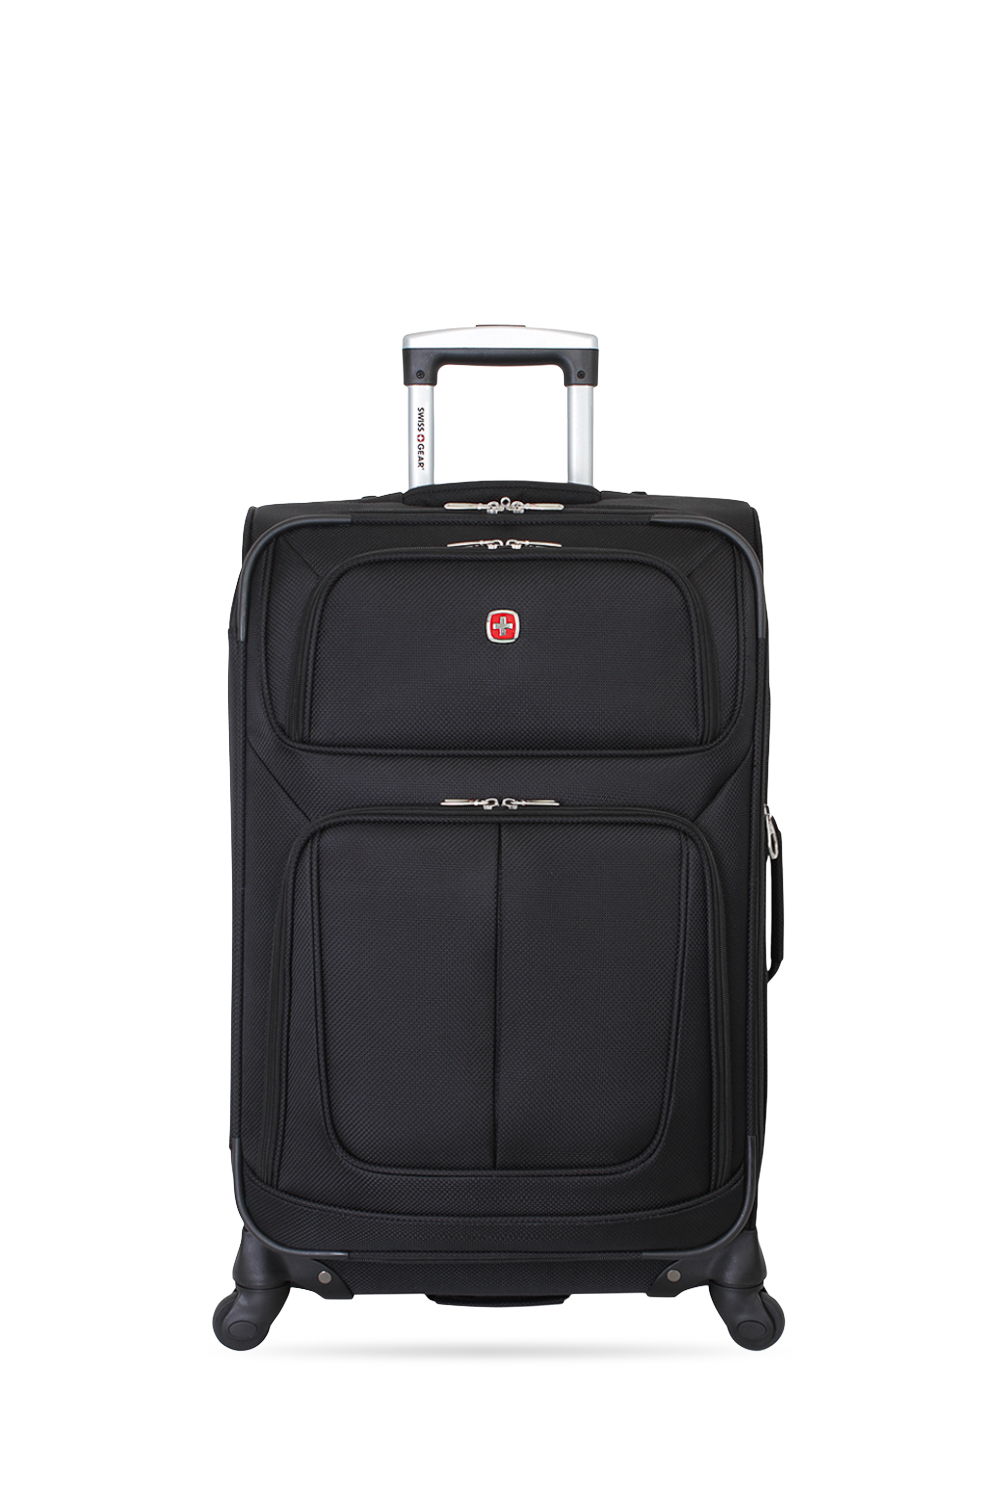 Travel with Class.. #swissmountaineer #brandrootretail #travelling # traveller #travelluggage #trolleybag | Travel luggage, Trolley bags, Luggage